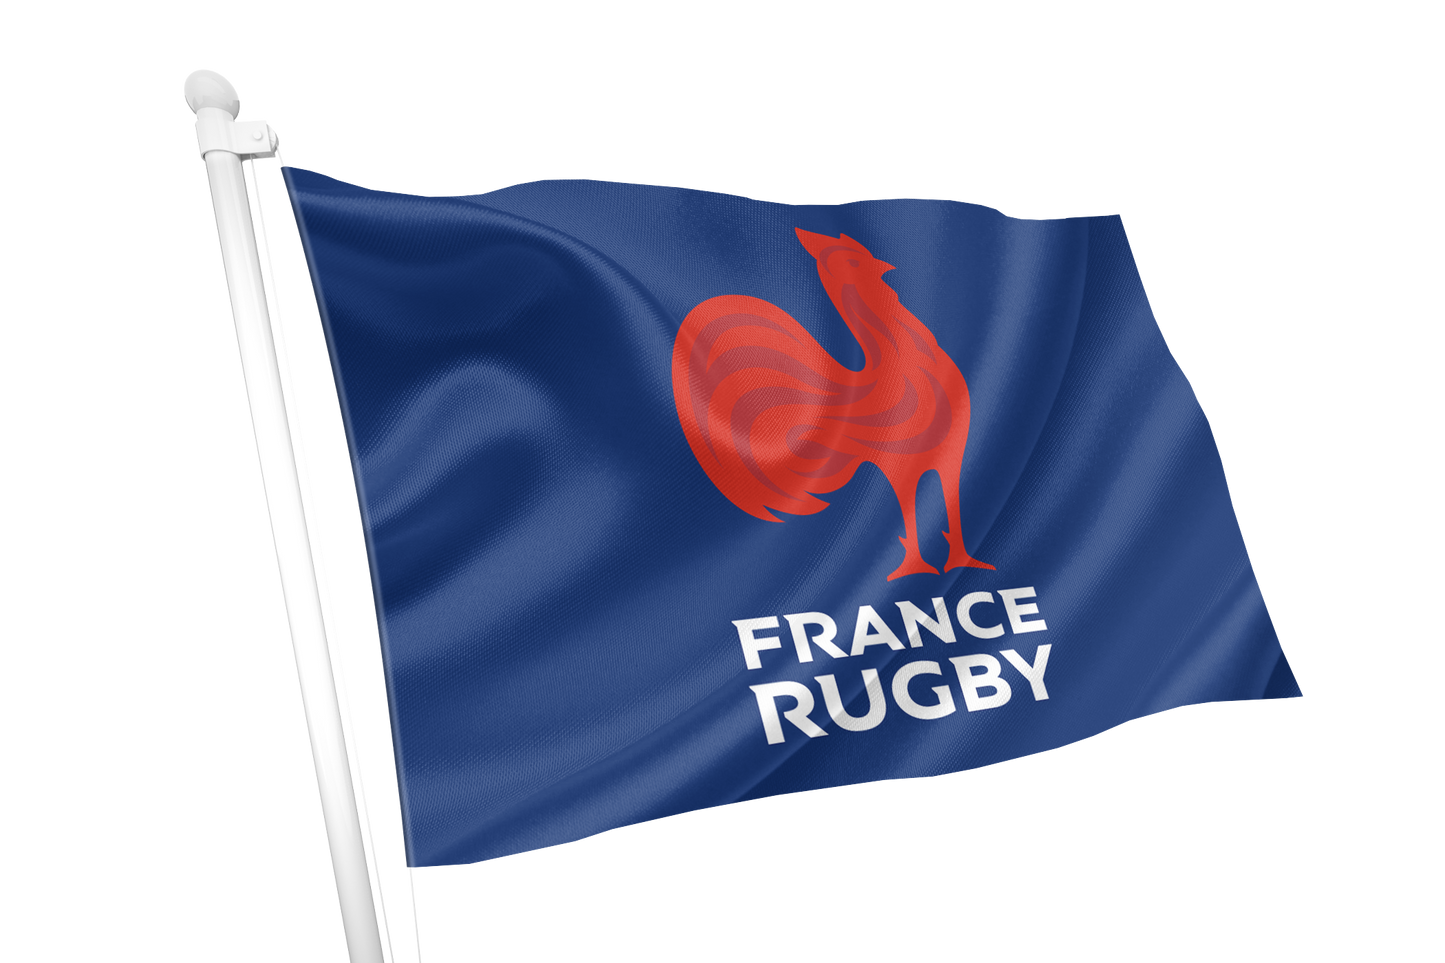 Frankreich-Rugby-Wappenflagge